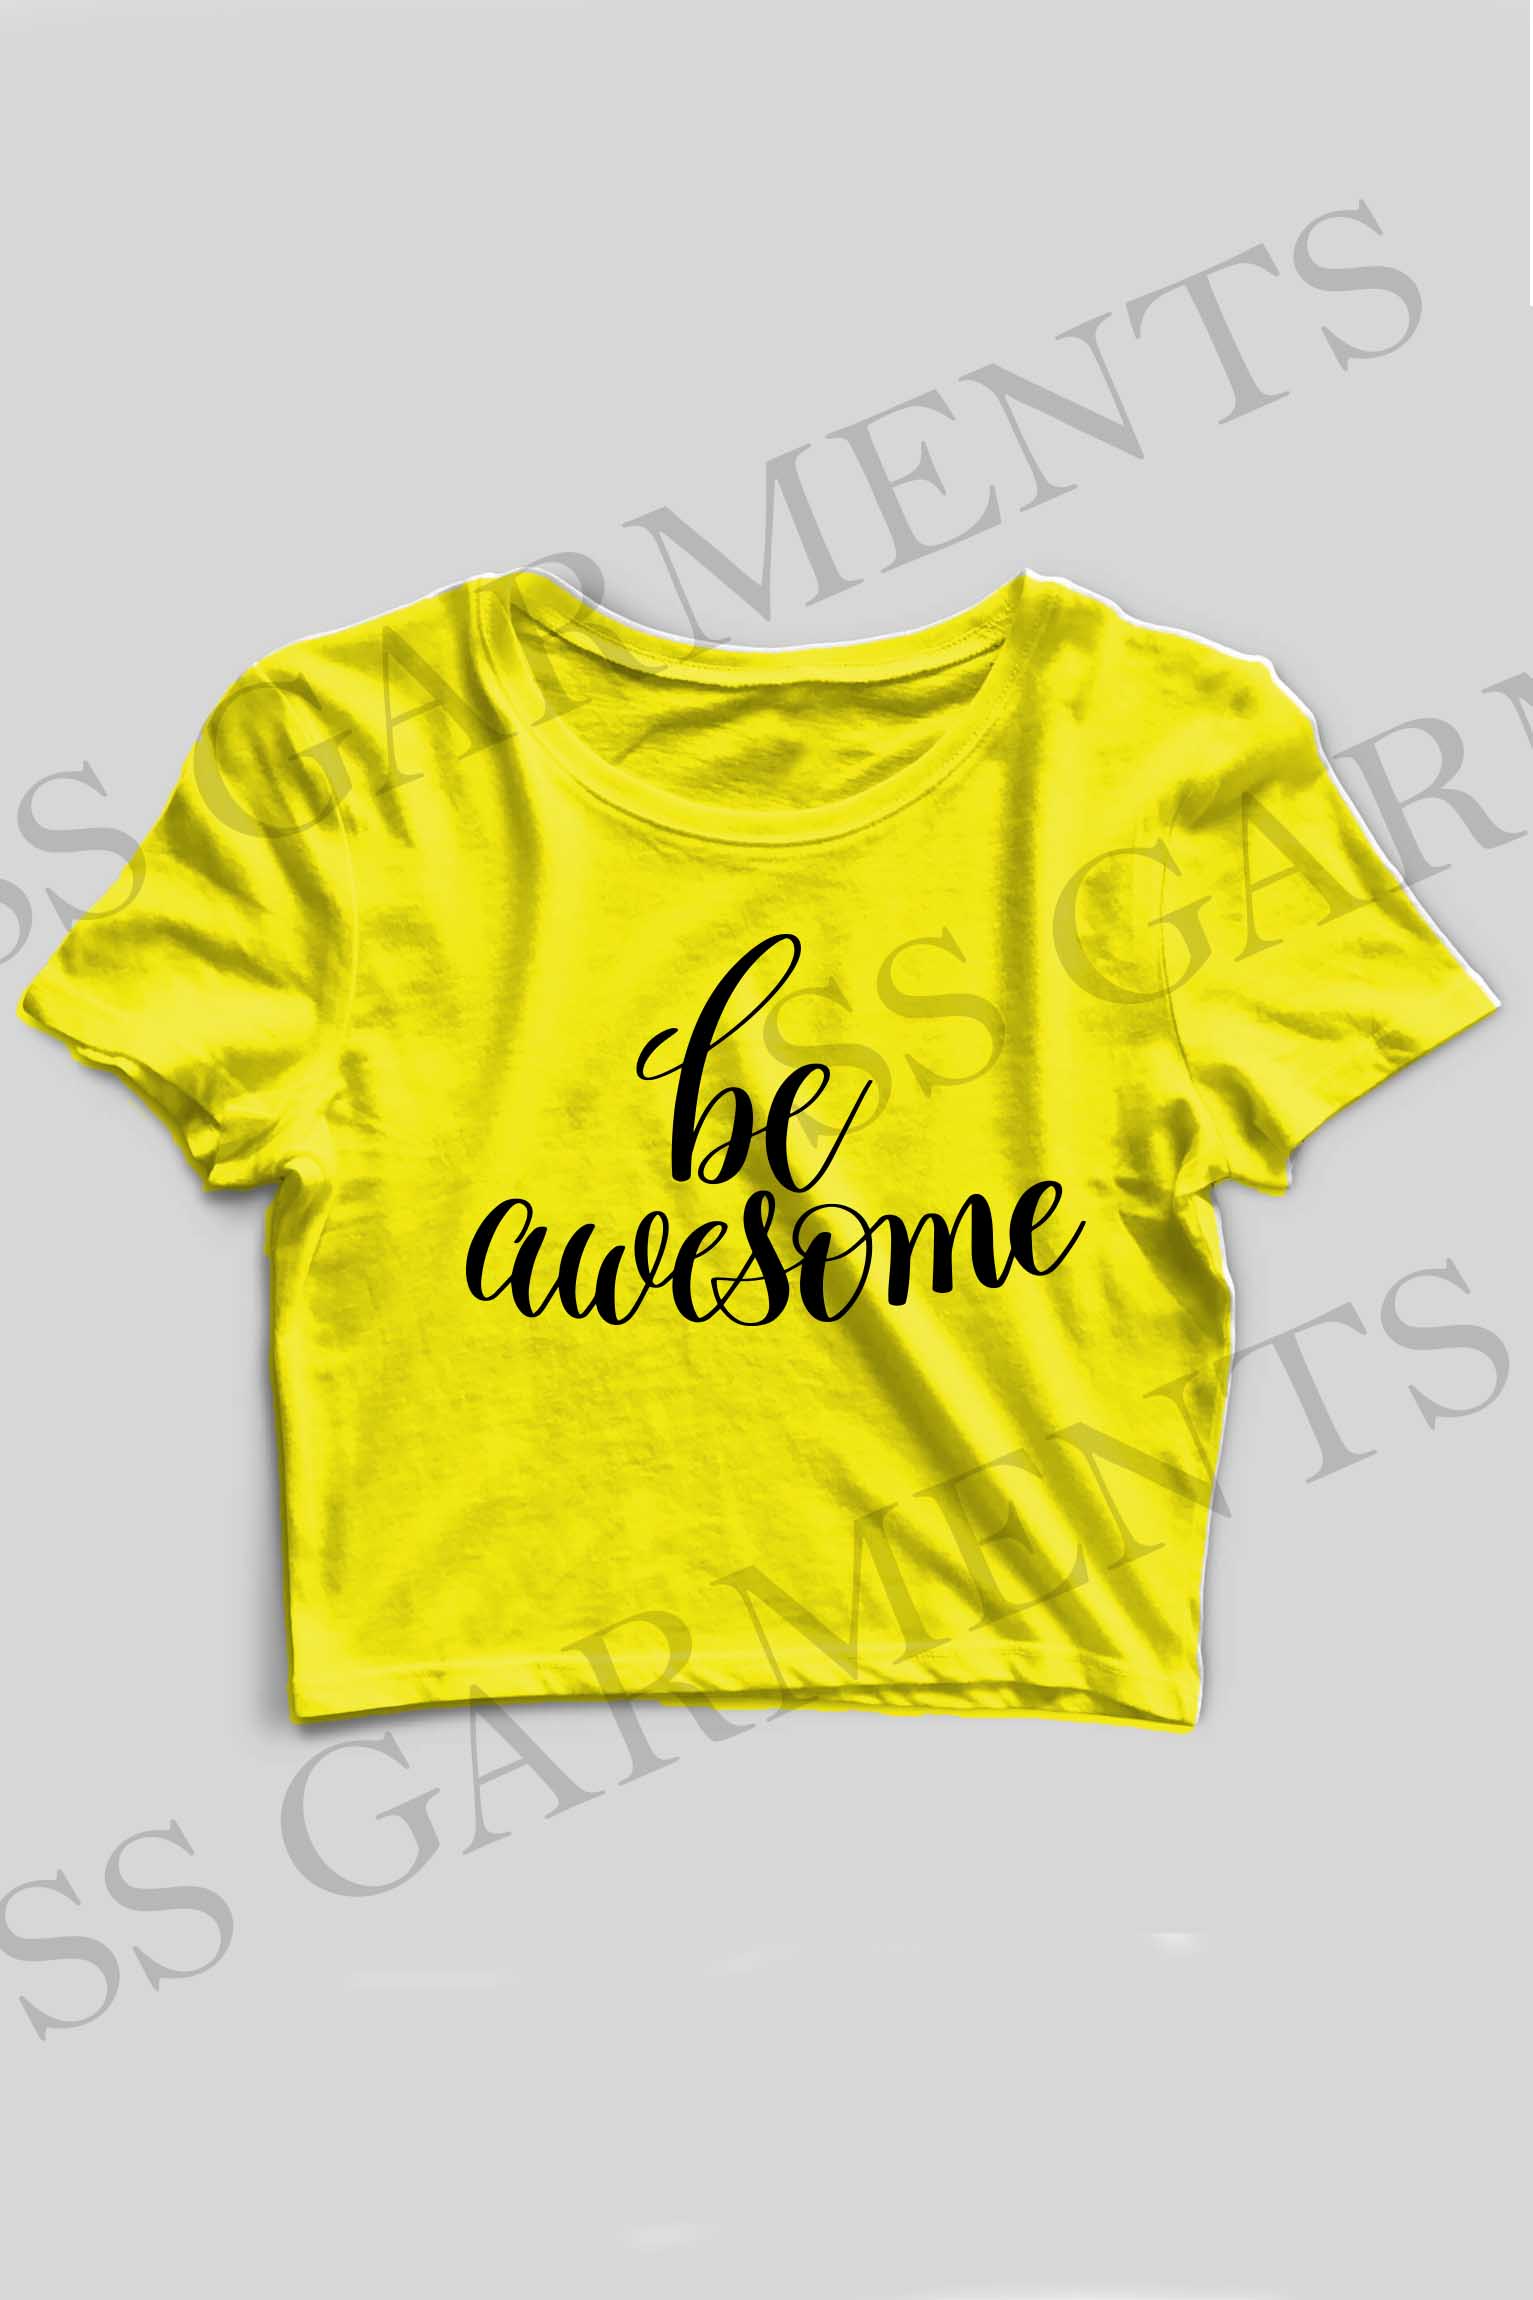 Crop Top Round Neck Be Awesome Printed T-shirt